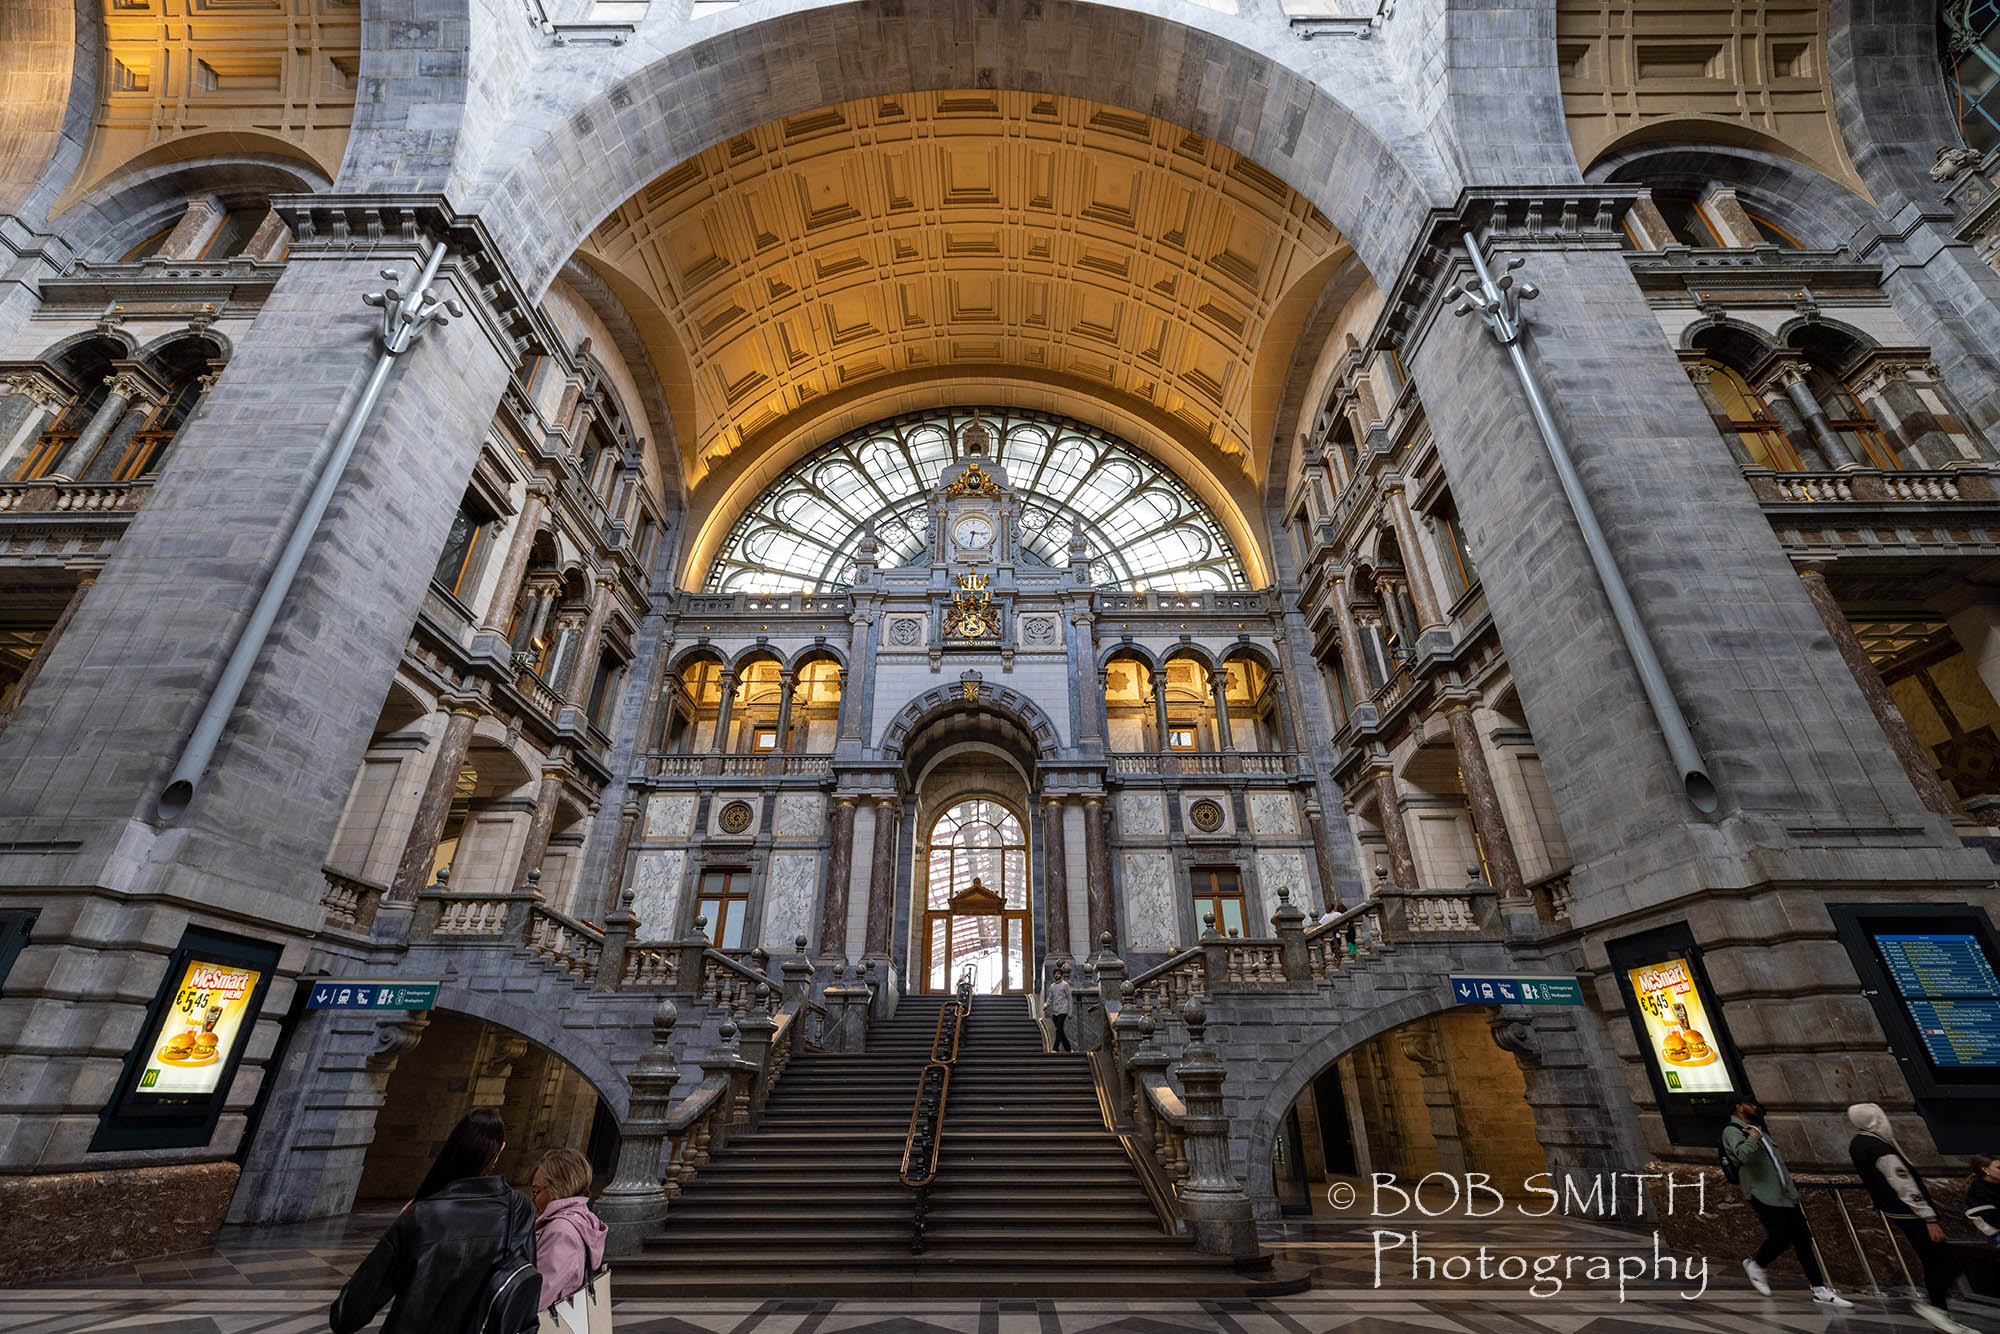 The interior of the central railway station in Antwerp